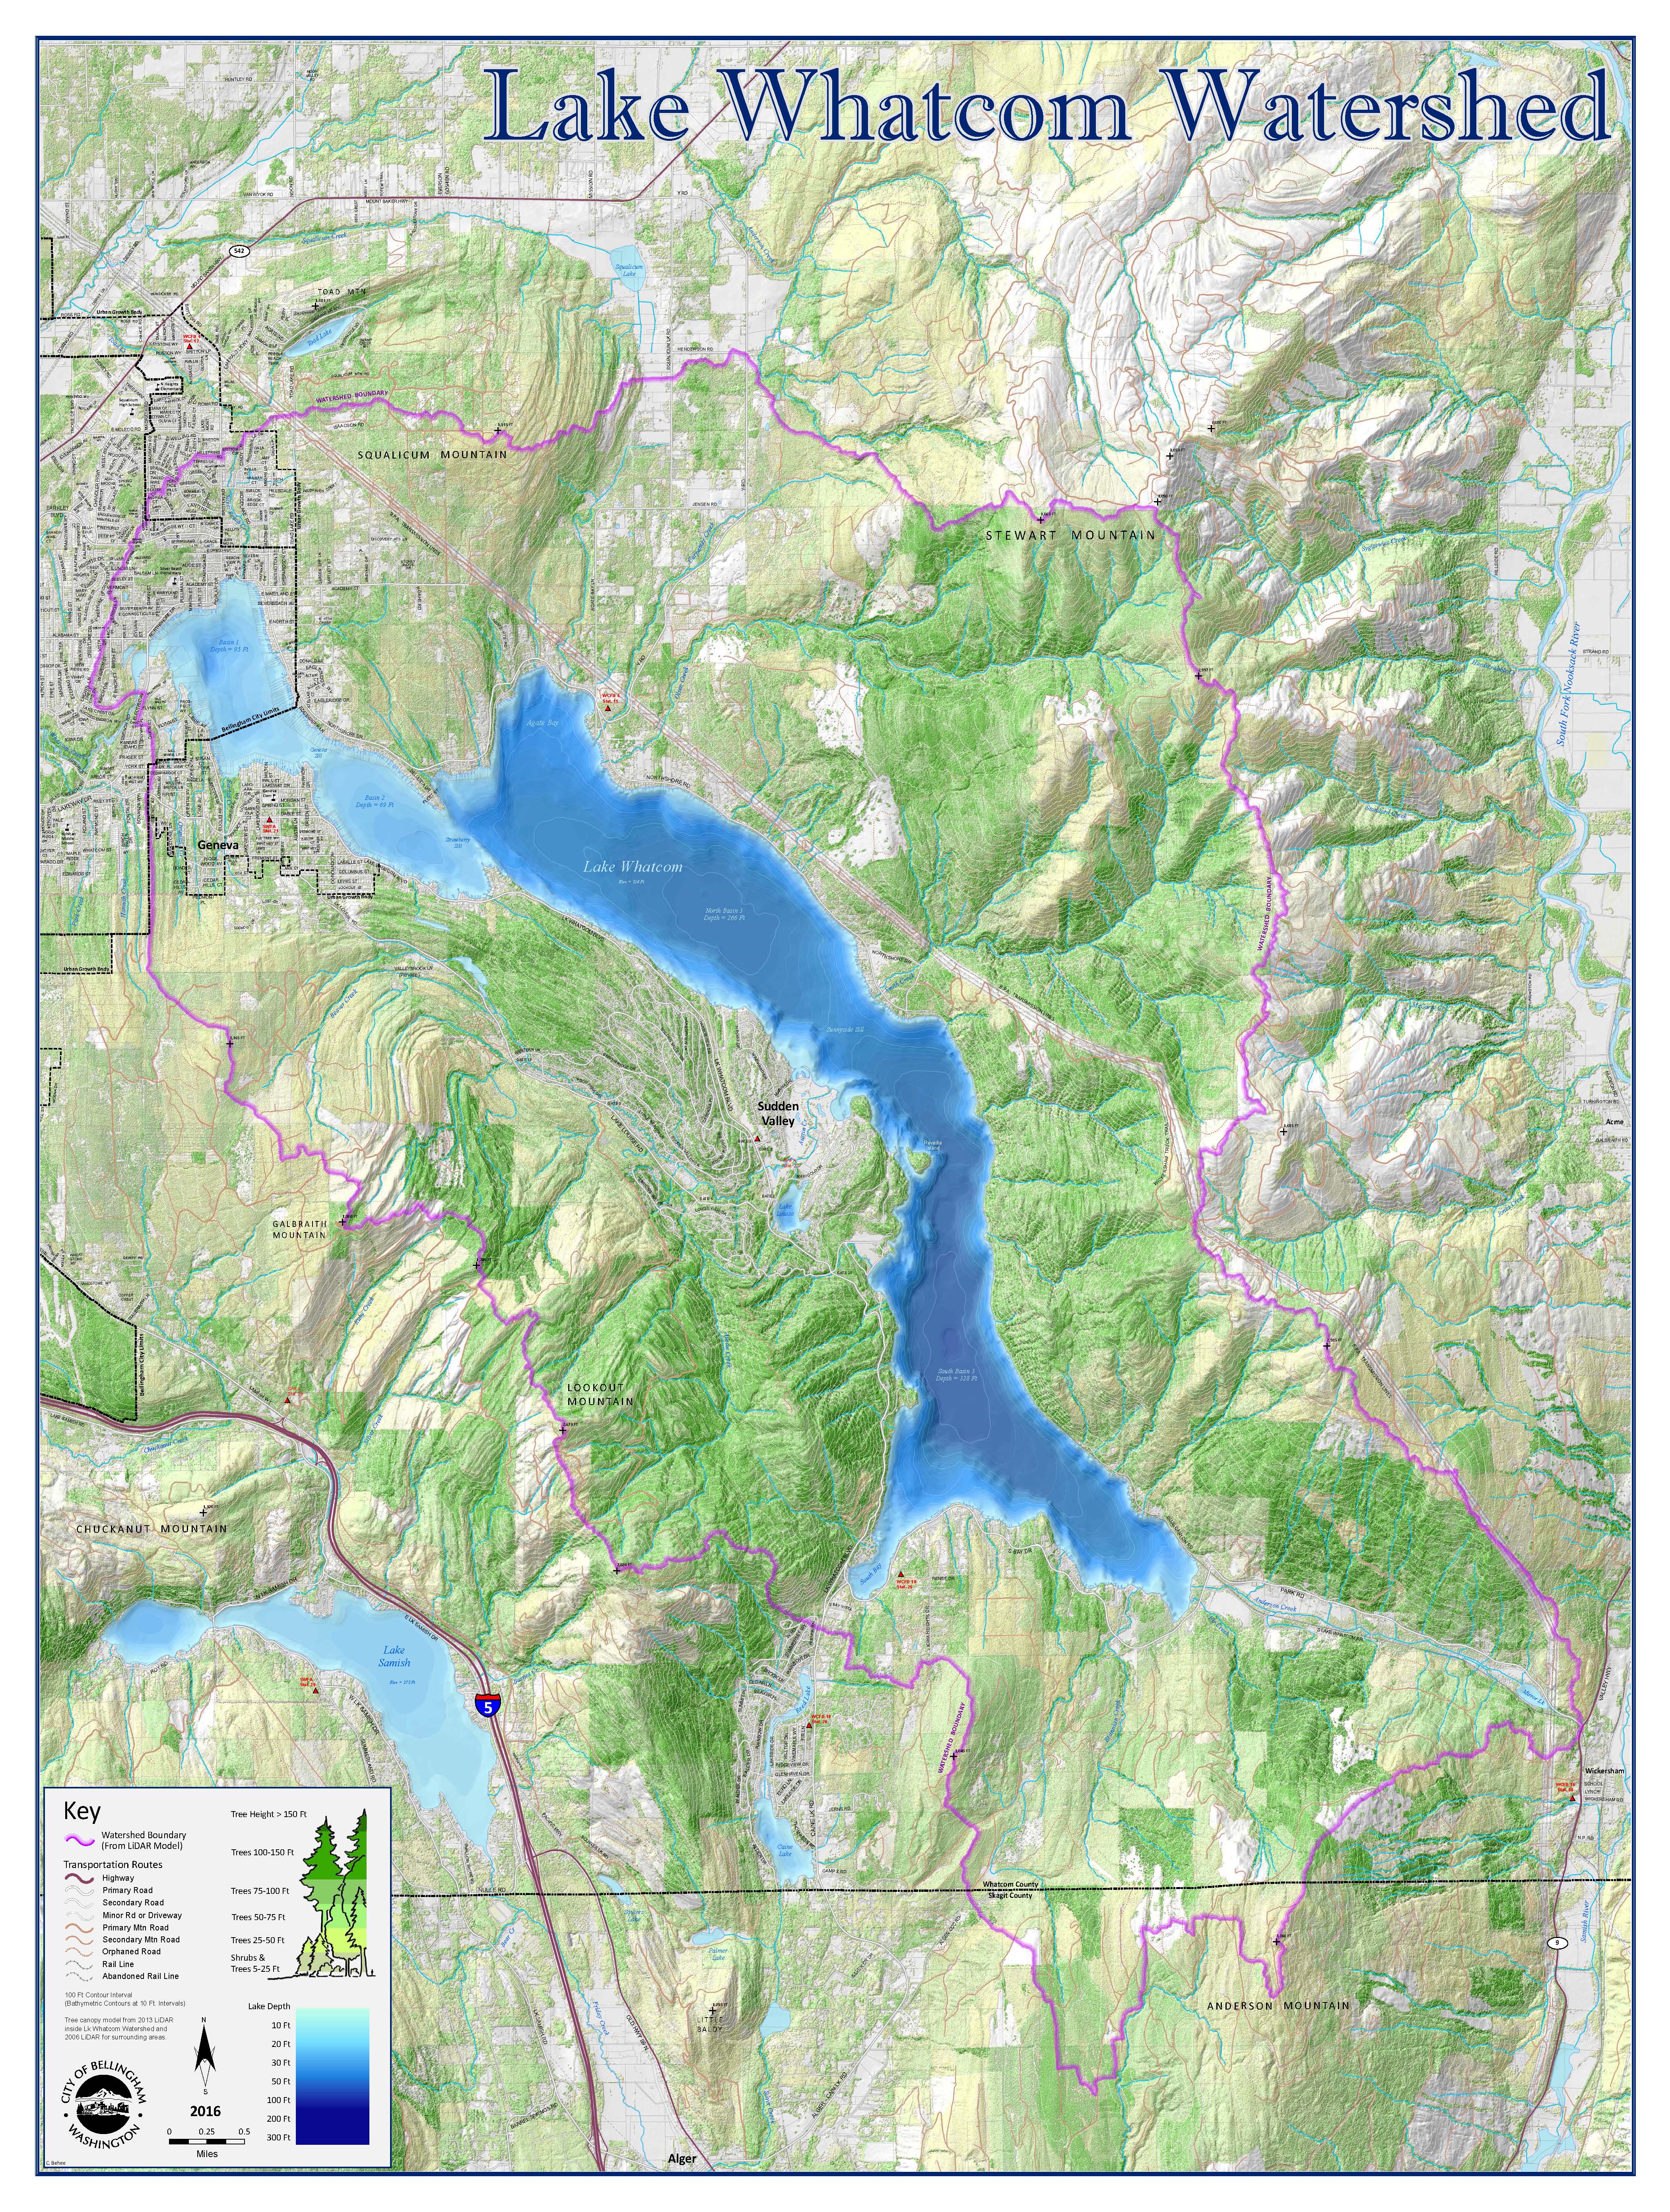 The lake is comprised of three subbasins. Sample Site 1 is located in Basin 1. Sample Site 2 is located in Basin 2. Sample Sites 3 and 4 are located in Basin 3.                                 Courtesy: City of Bellingham